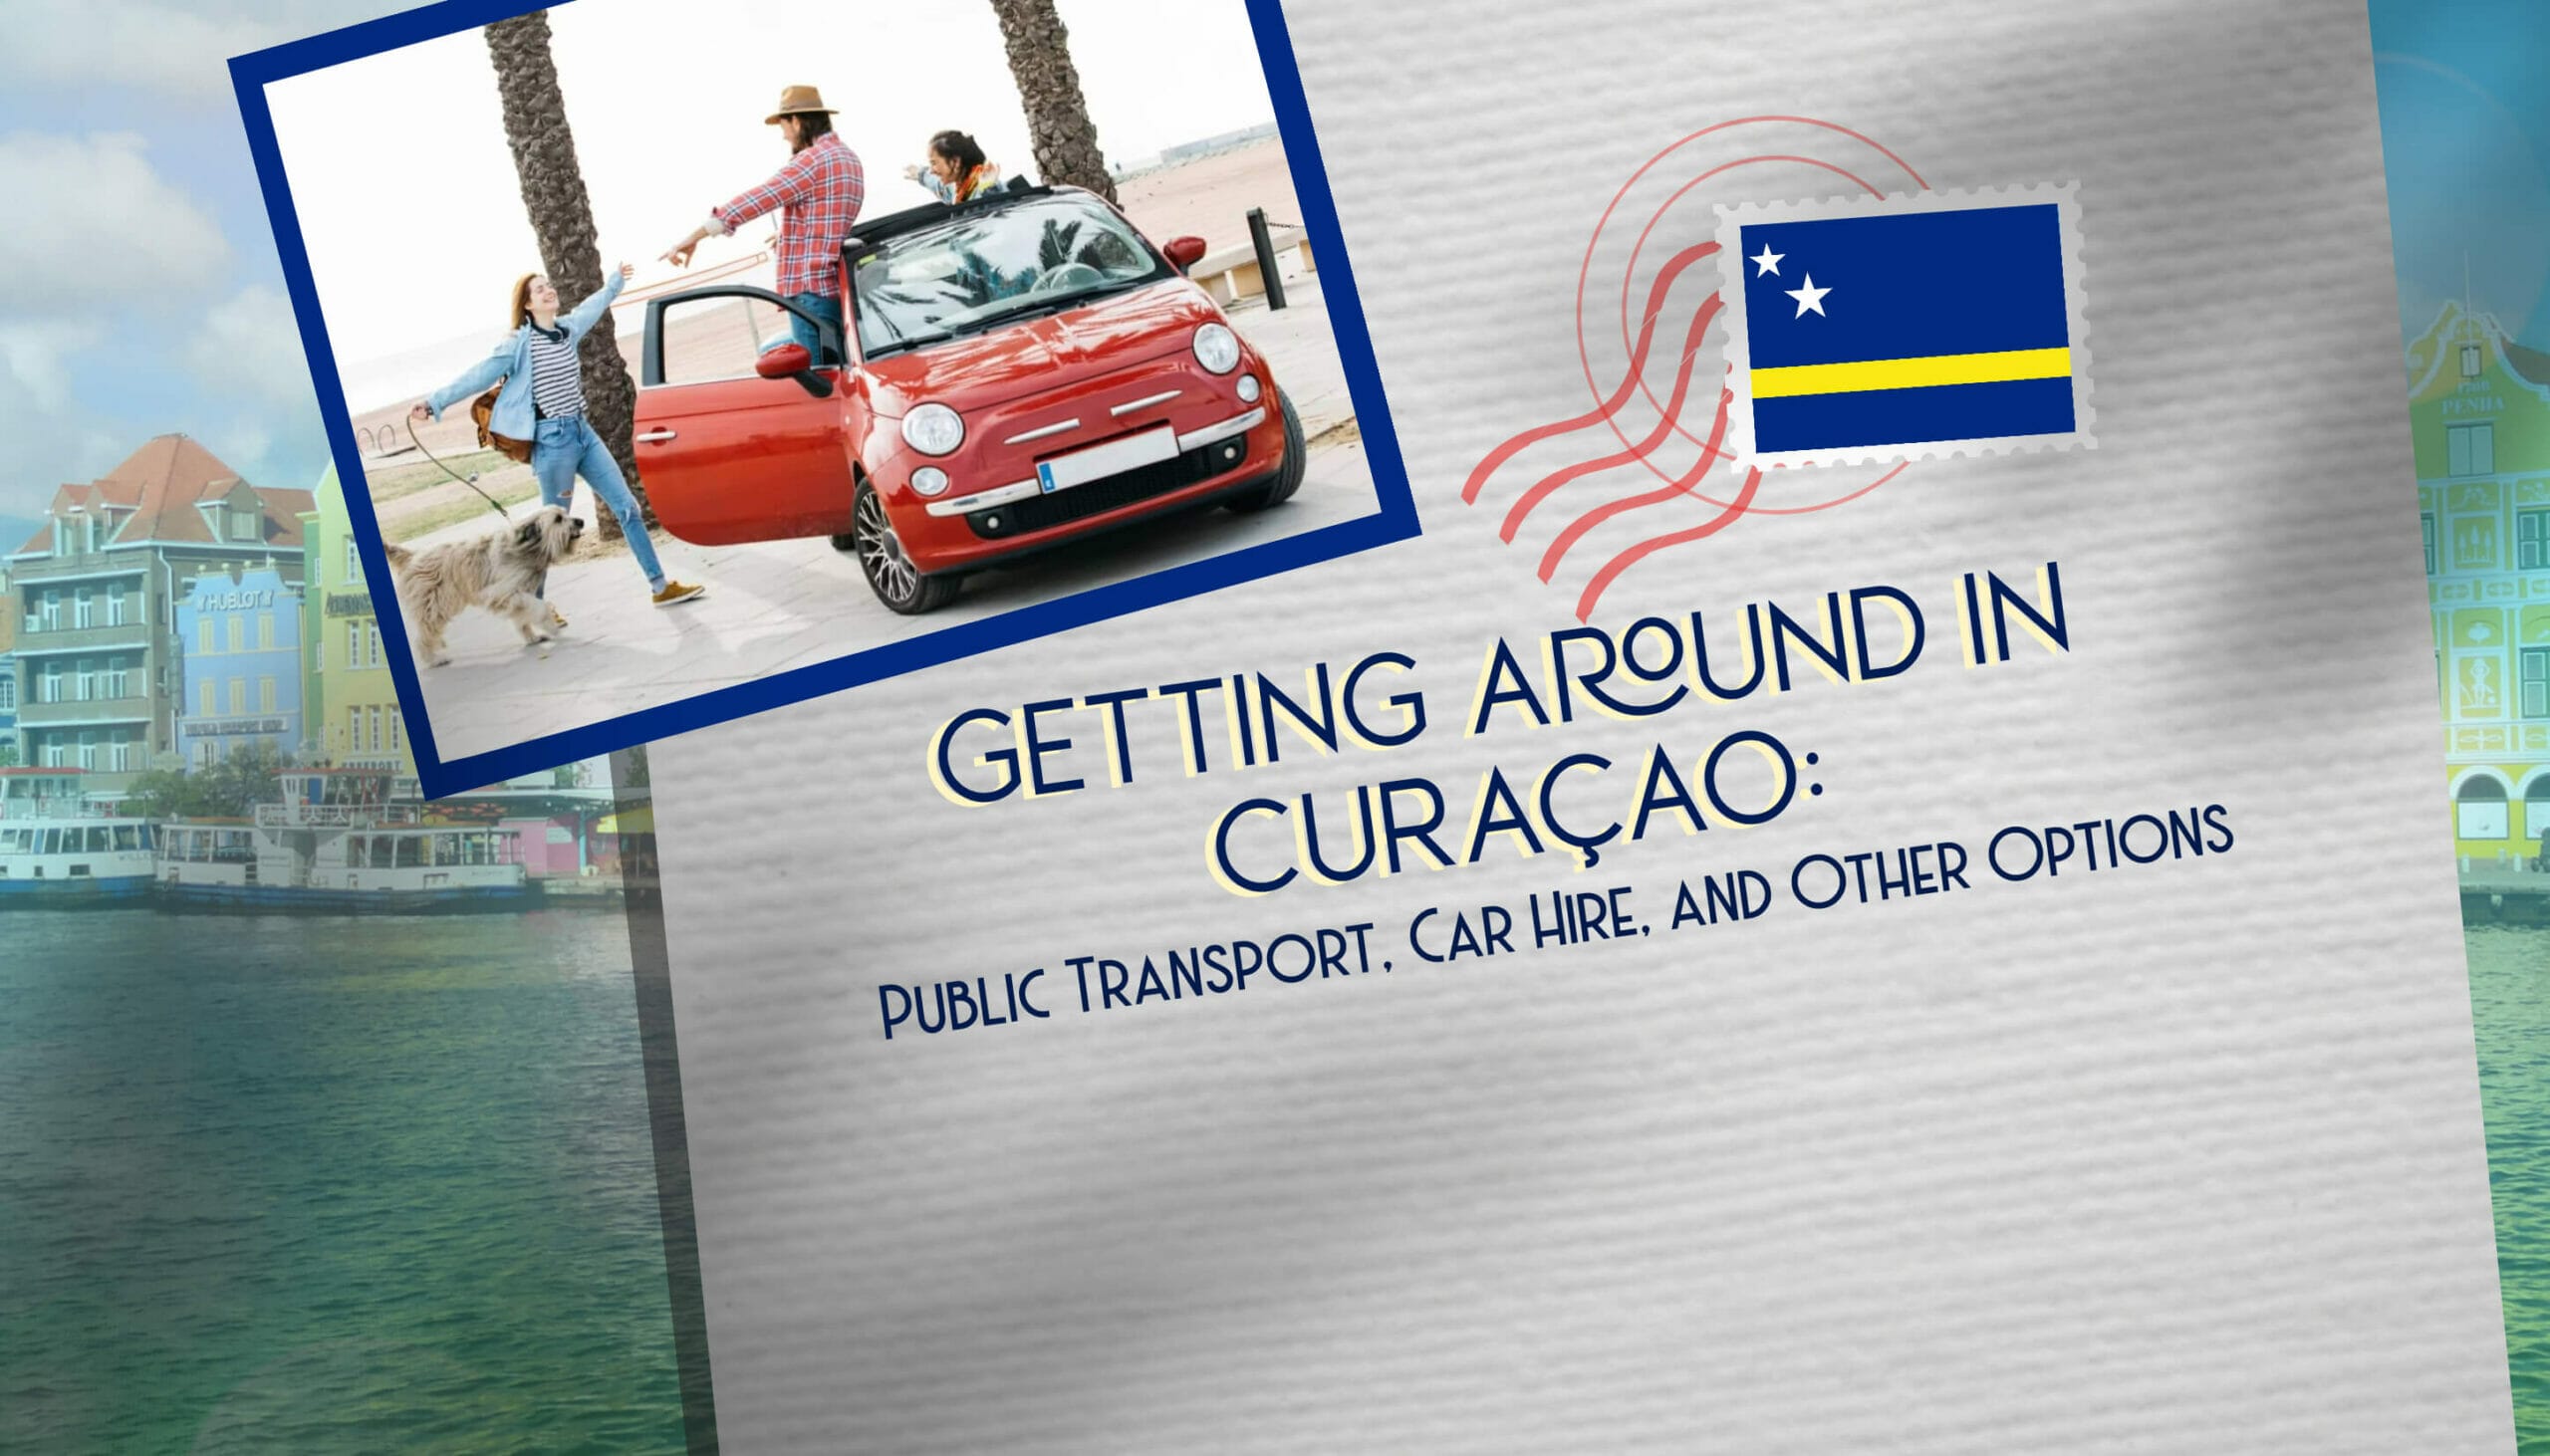 Getting Around in Curaçao Public Transport, Car Hire, and Other Options